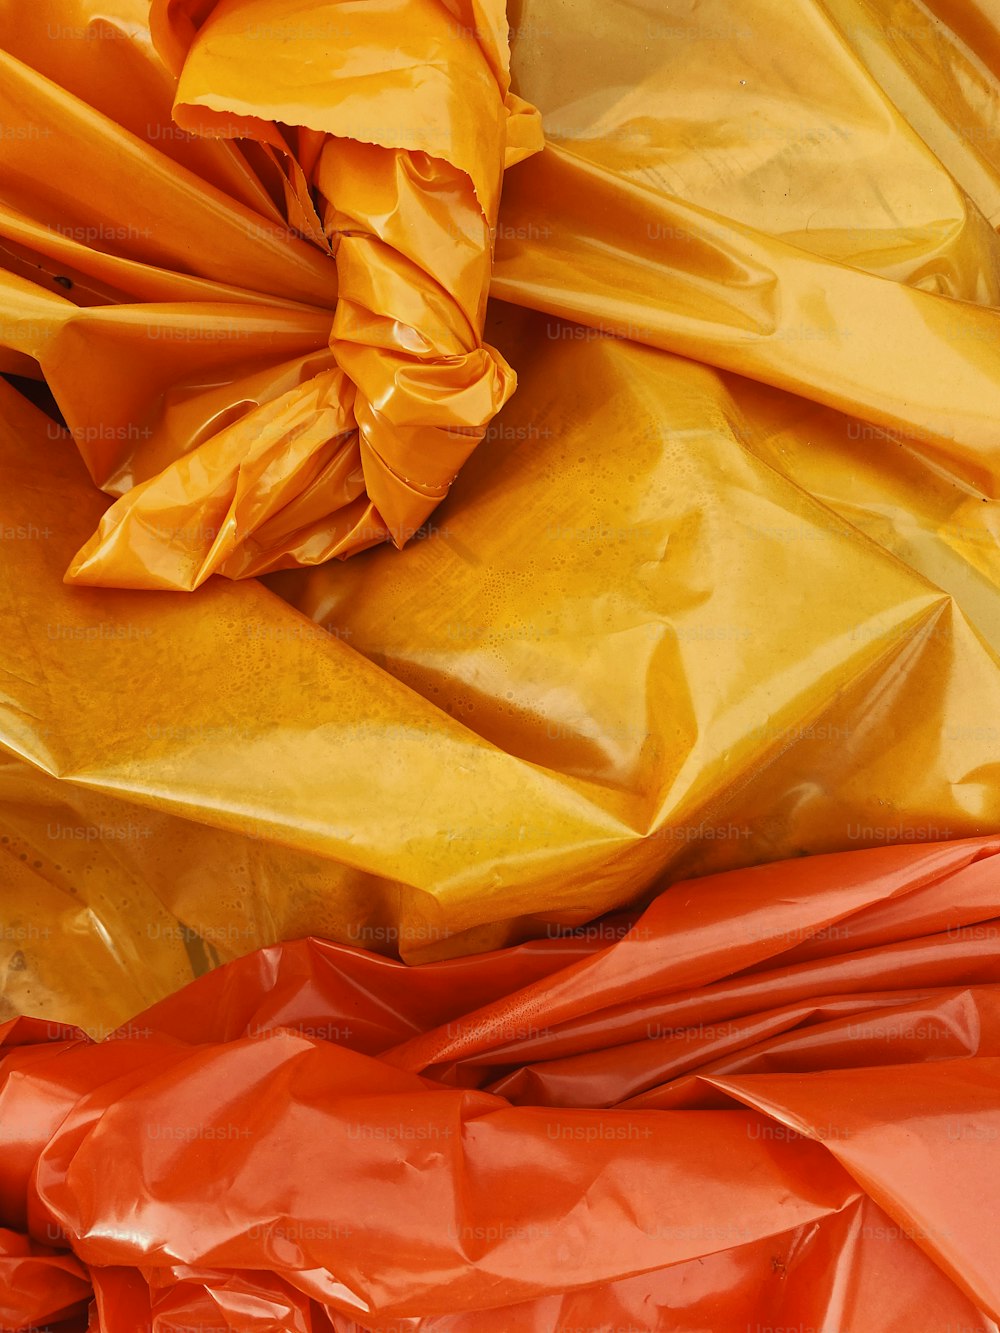 a pile of orange and yellow plastic bags